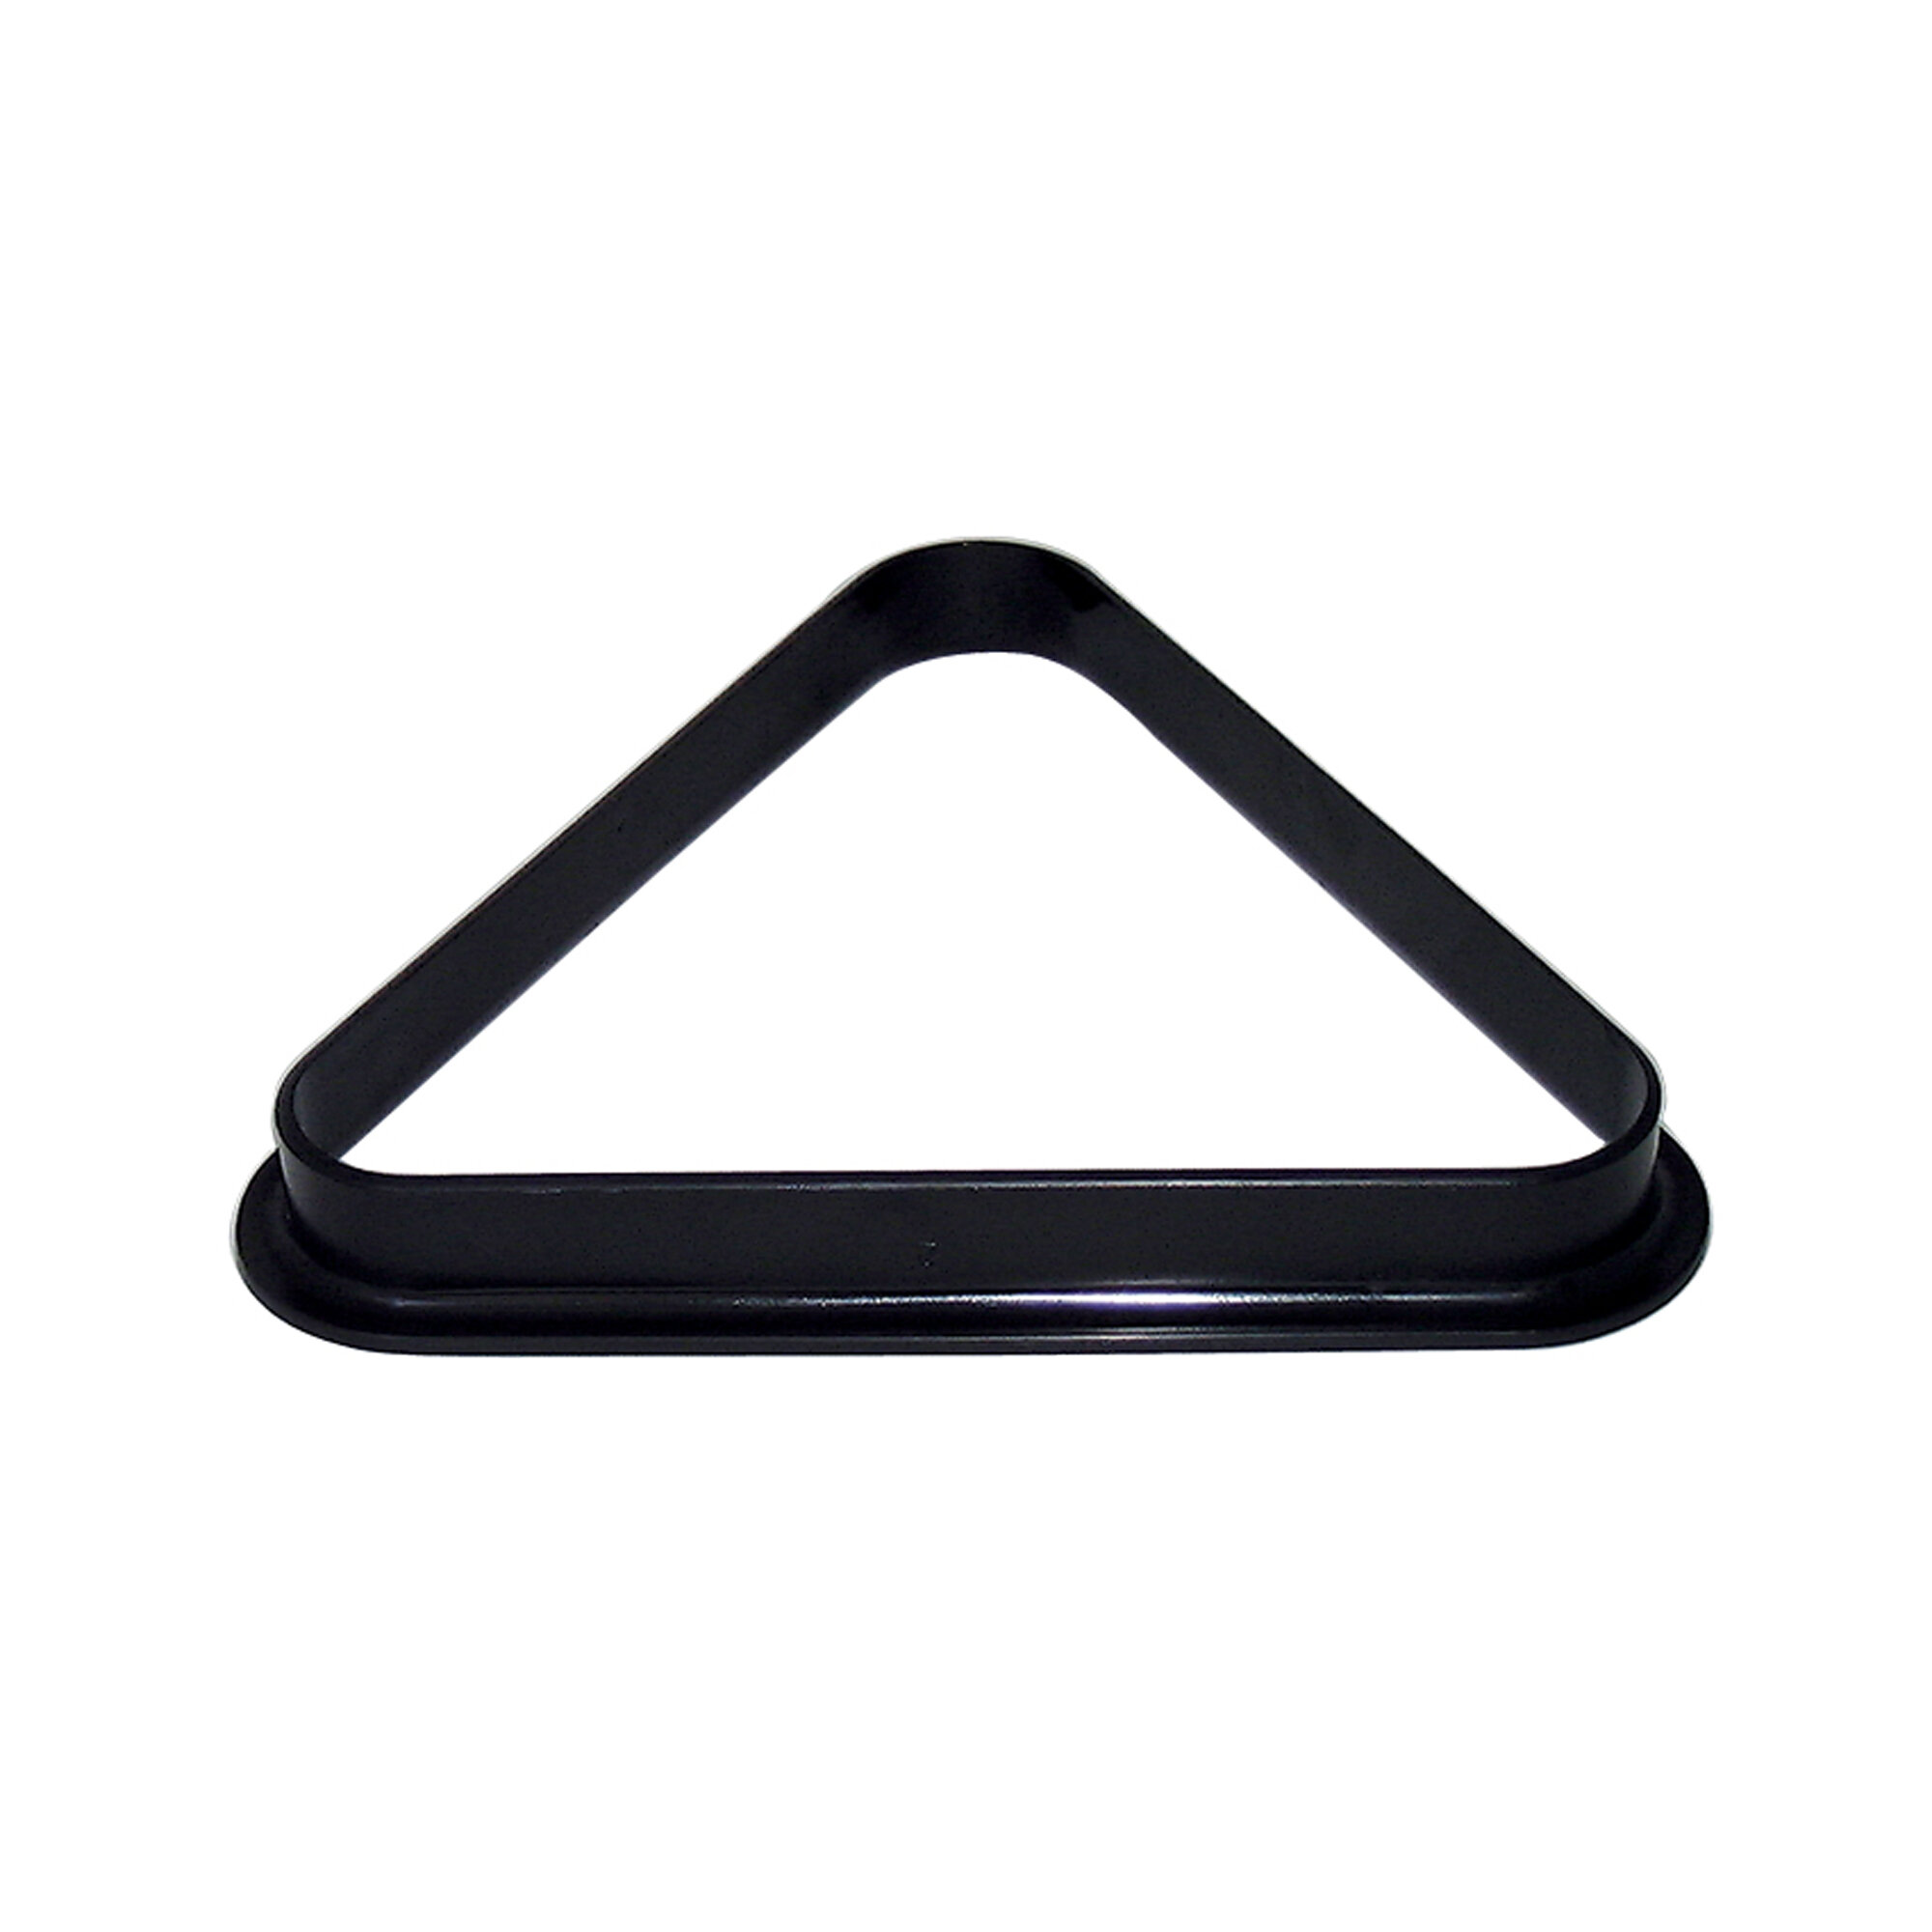 Billiards 9 Ball Pool Table Triangle Rack Heavy Duty Black Plastic Sturdy and Cost-Effective 